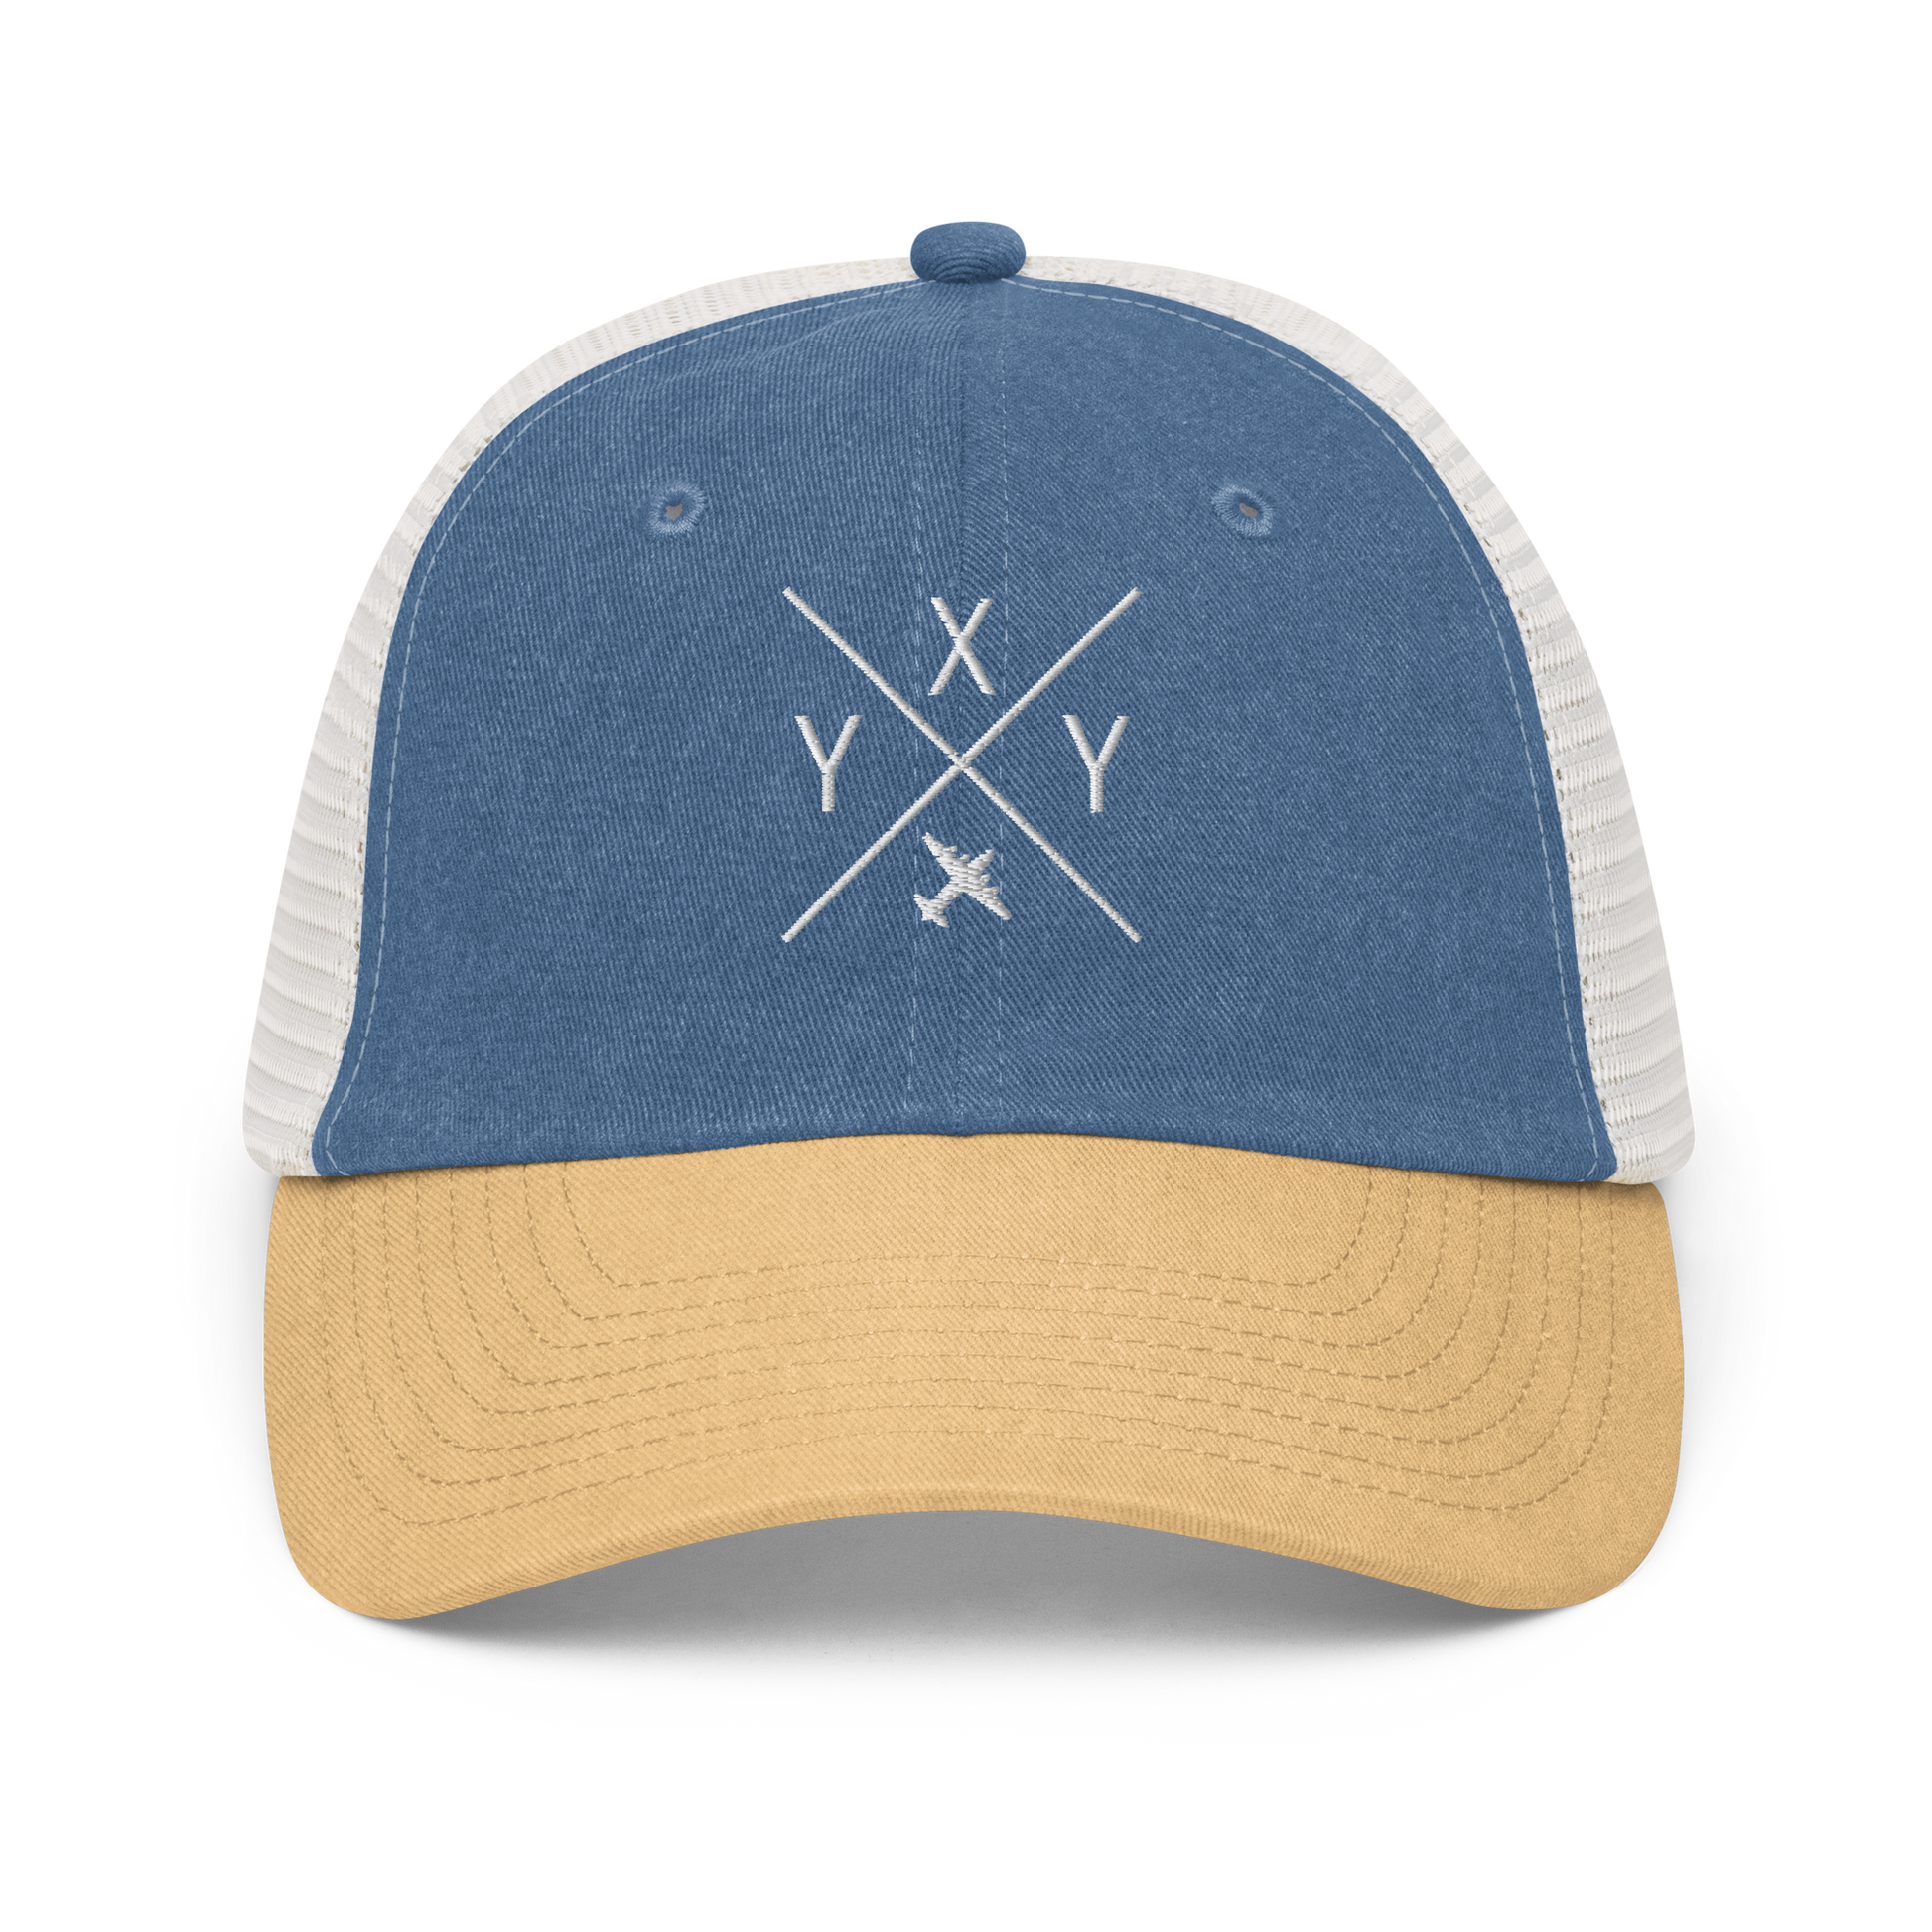 Crossed-X Pigment-Dyed Trucker Cap • YXY Whitehorse • YHM Designs - Image 01